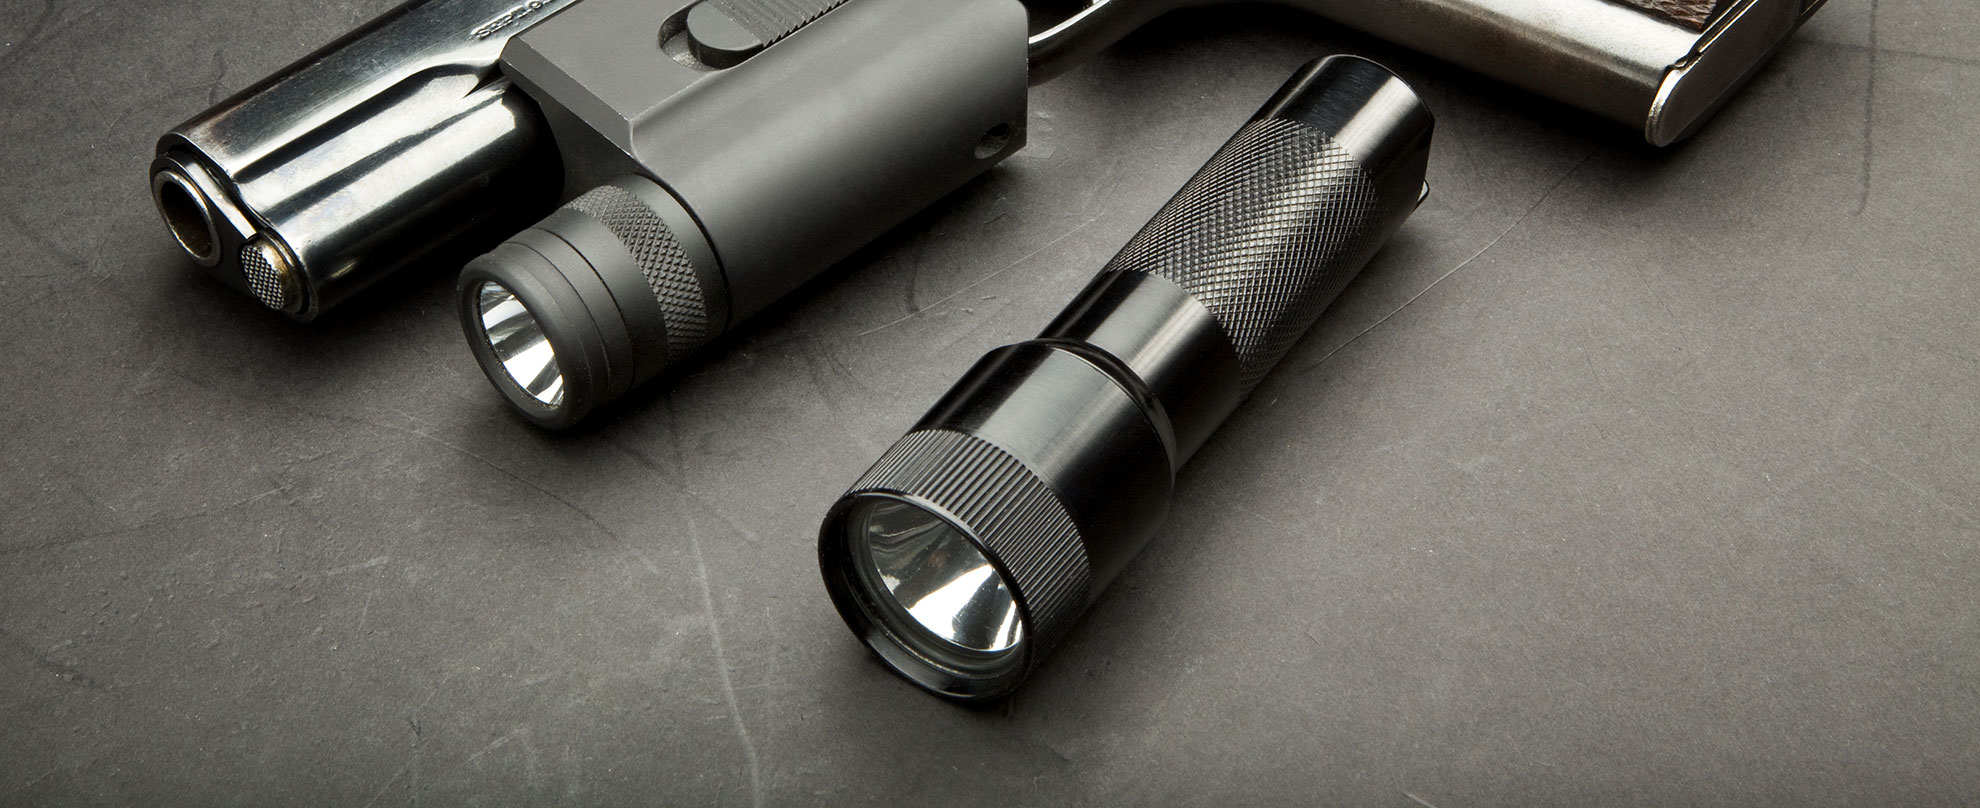 SureFire History: LPC Model 310The weaponlight that changed the game